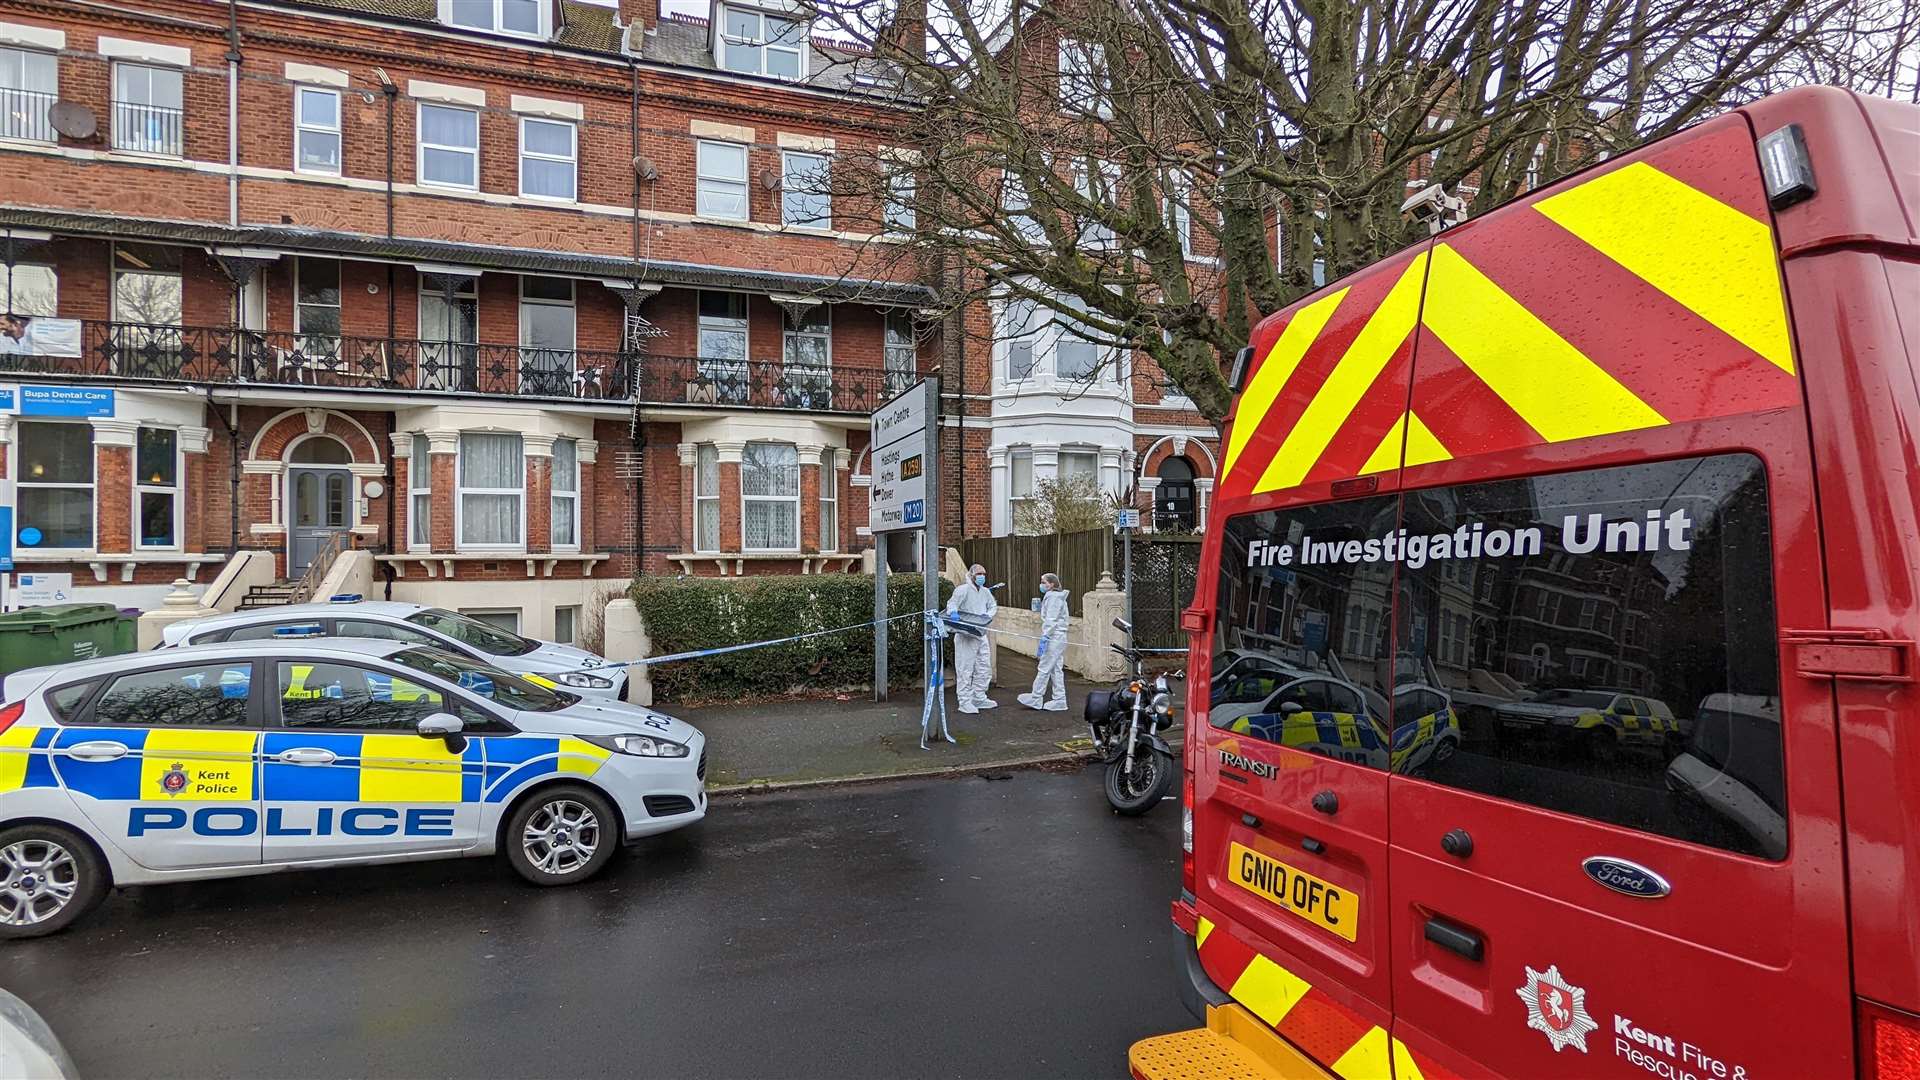 The body of Nicola Shaba was found after a fire in Folkestone